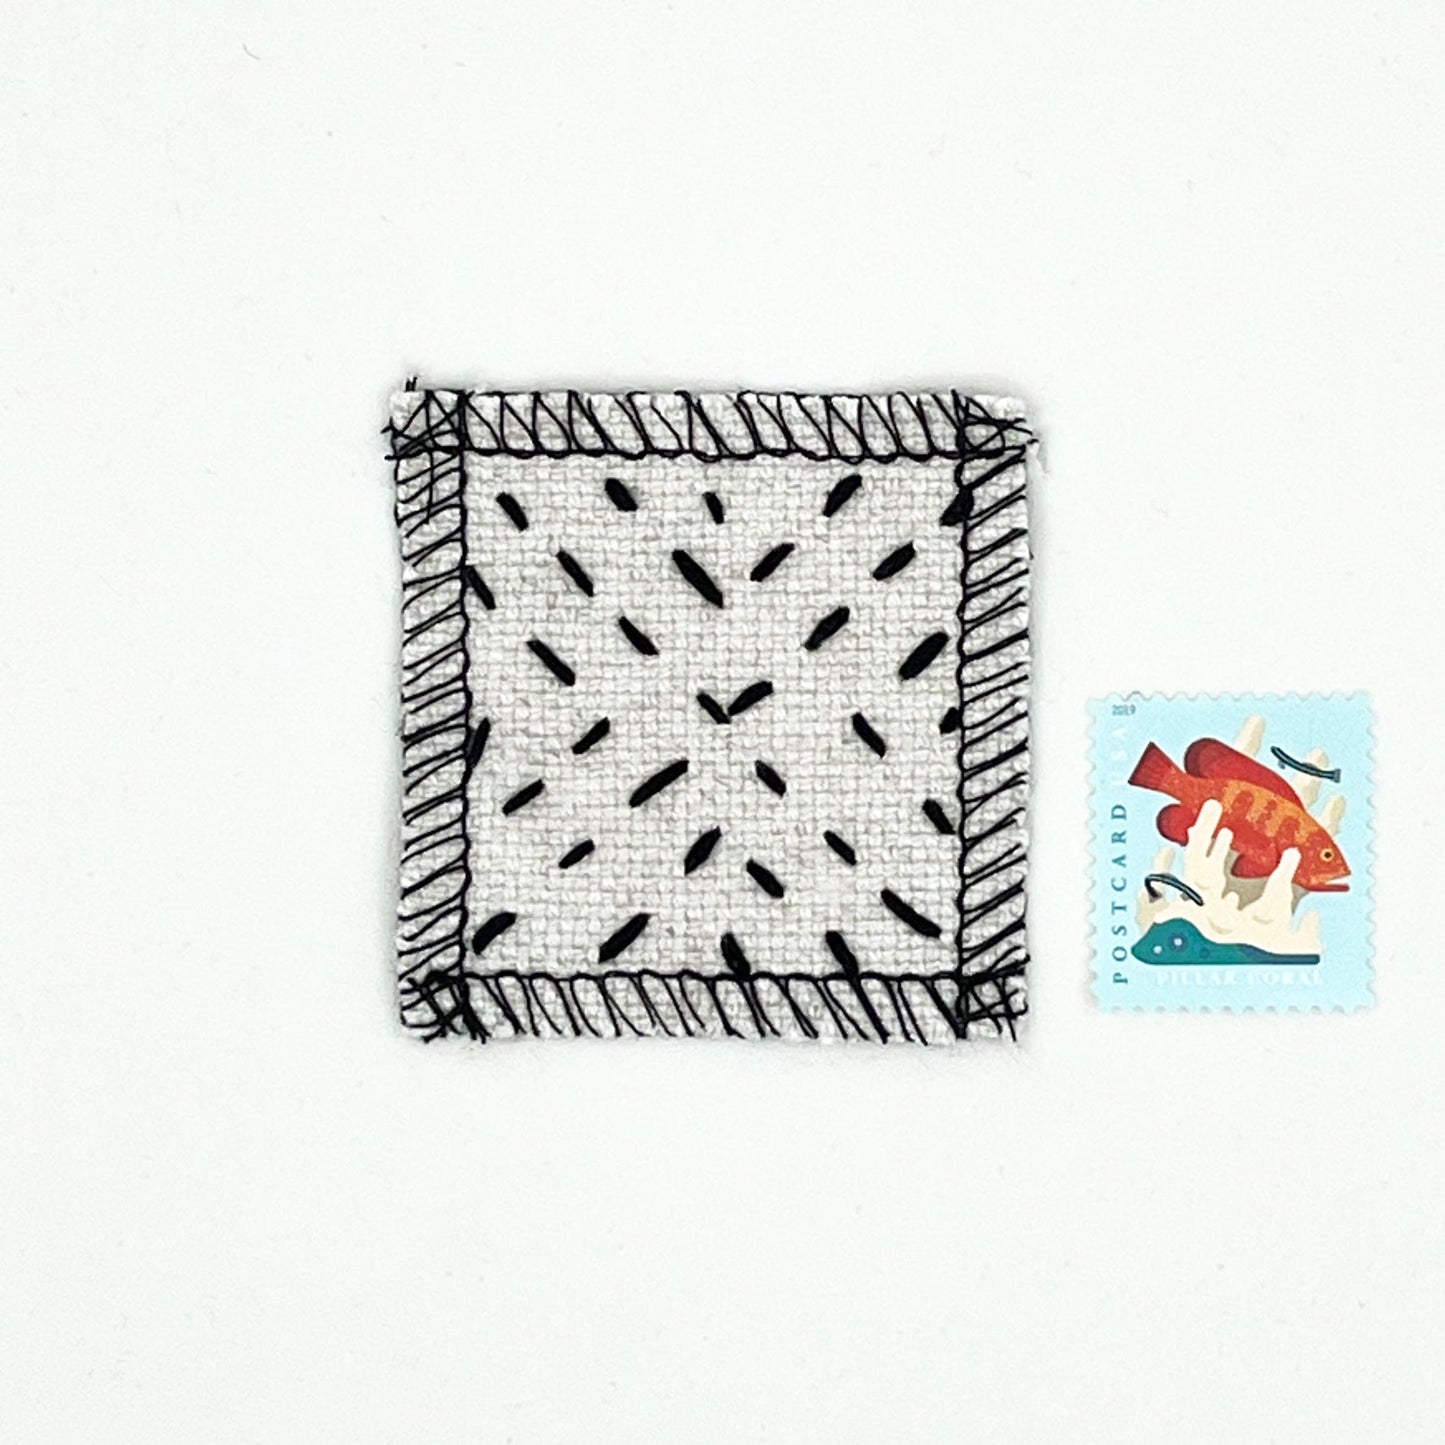 square natural colored patch with stitching in black of a radiating X shape, next to a stamp for size comparison